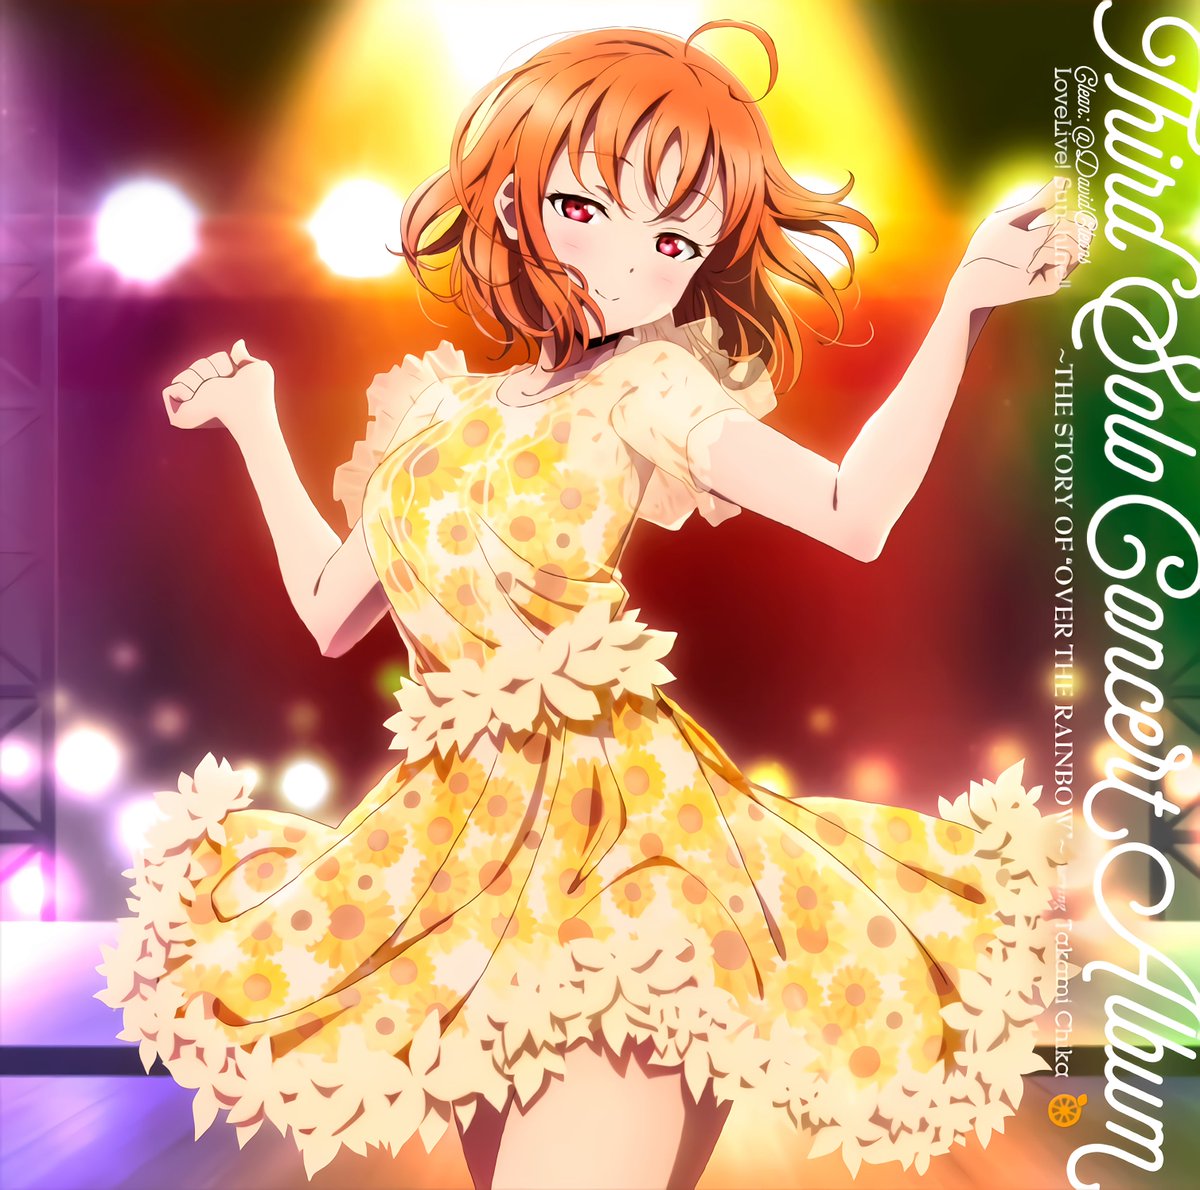 Cover art for『Chika Takami (Anju Inami) from Aqours - ナミオトリフレイン』from the release『LoveLive! Sunshine!! Third Solo Concert Album ～THE STORY OF “OVER THE RAINBOW”～ starring Takami Chika